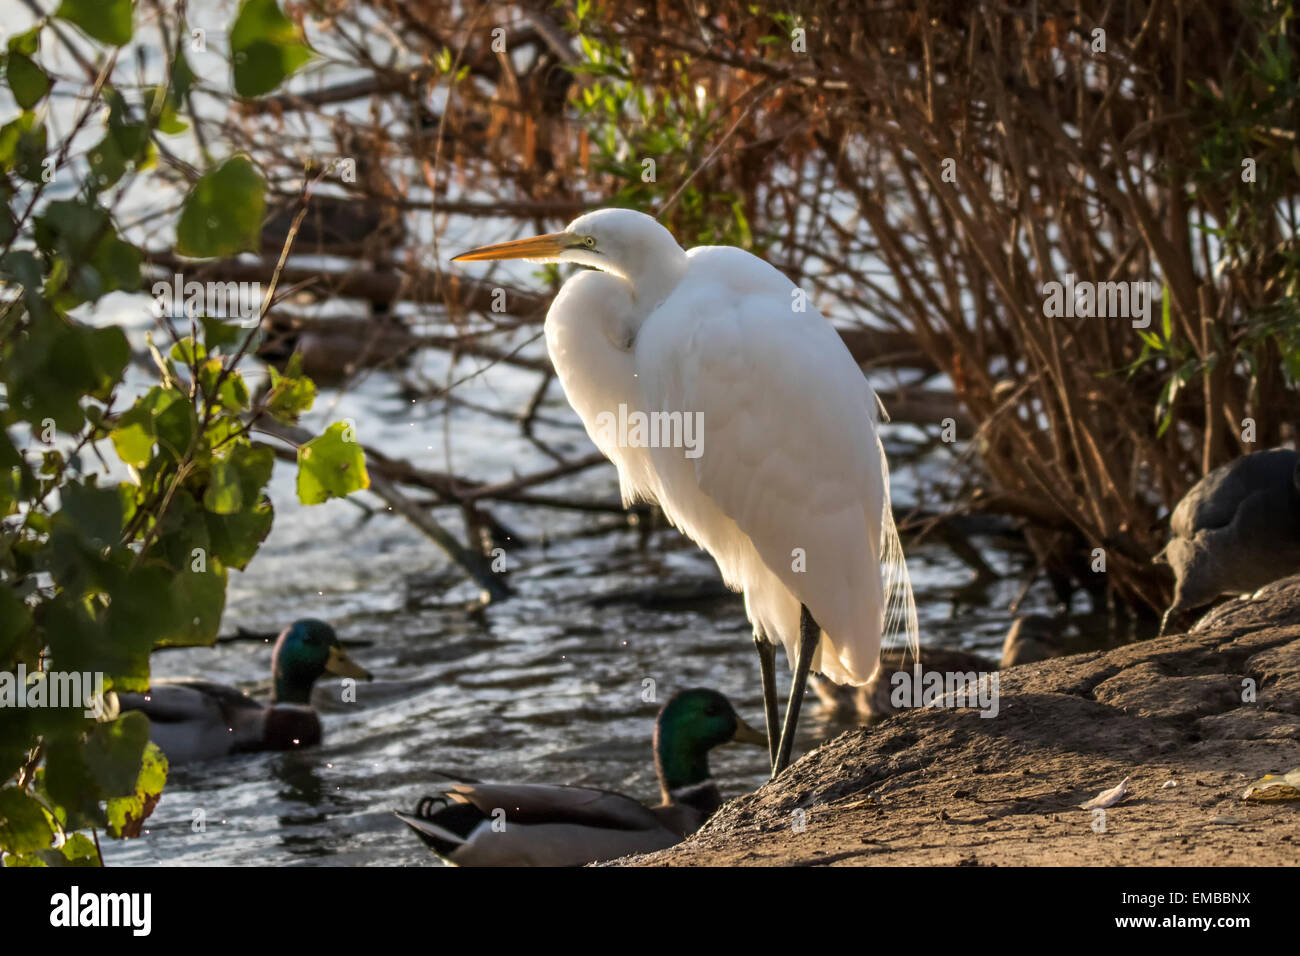 GREAT EGRET (Ardea alba) in the reeds of a small pond Stock Photo